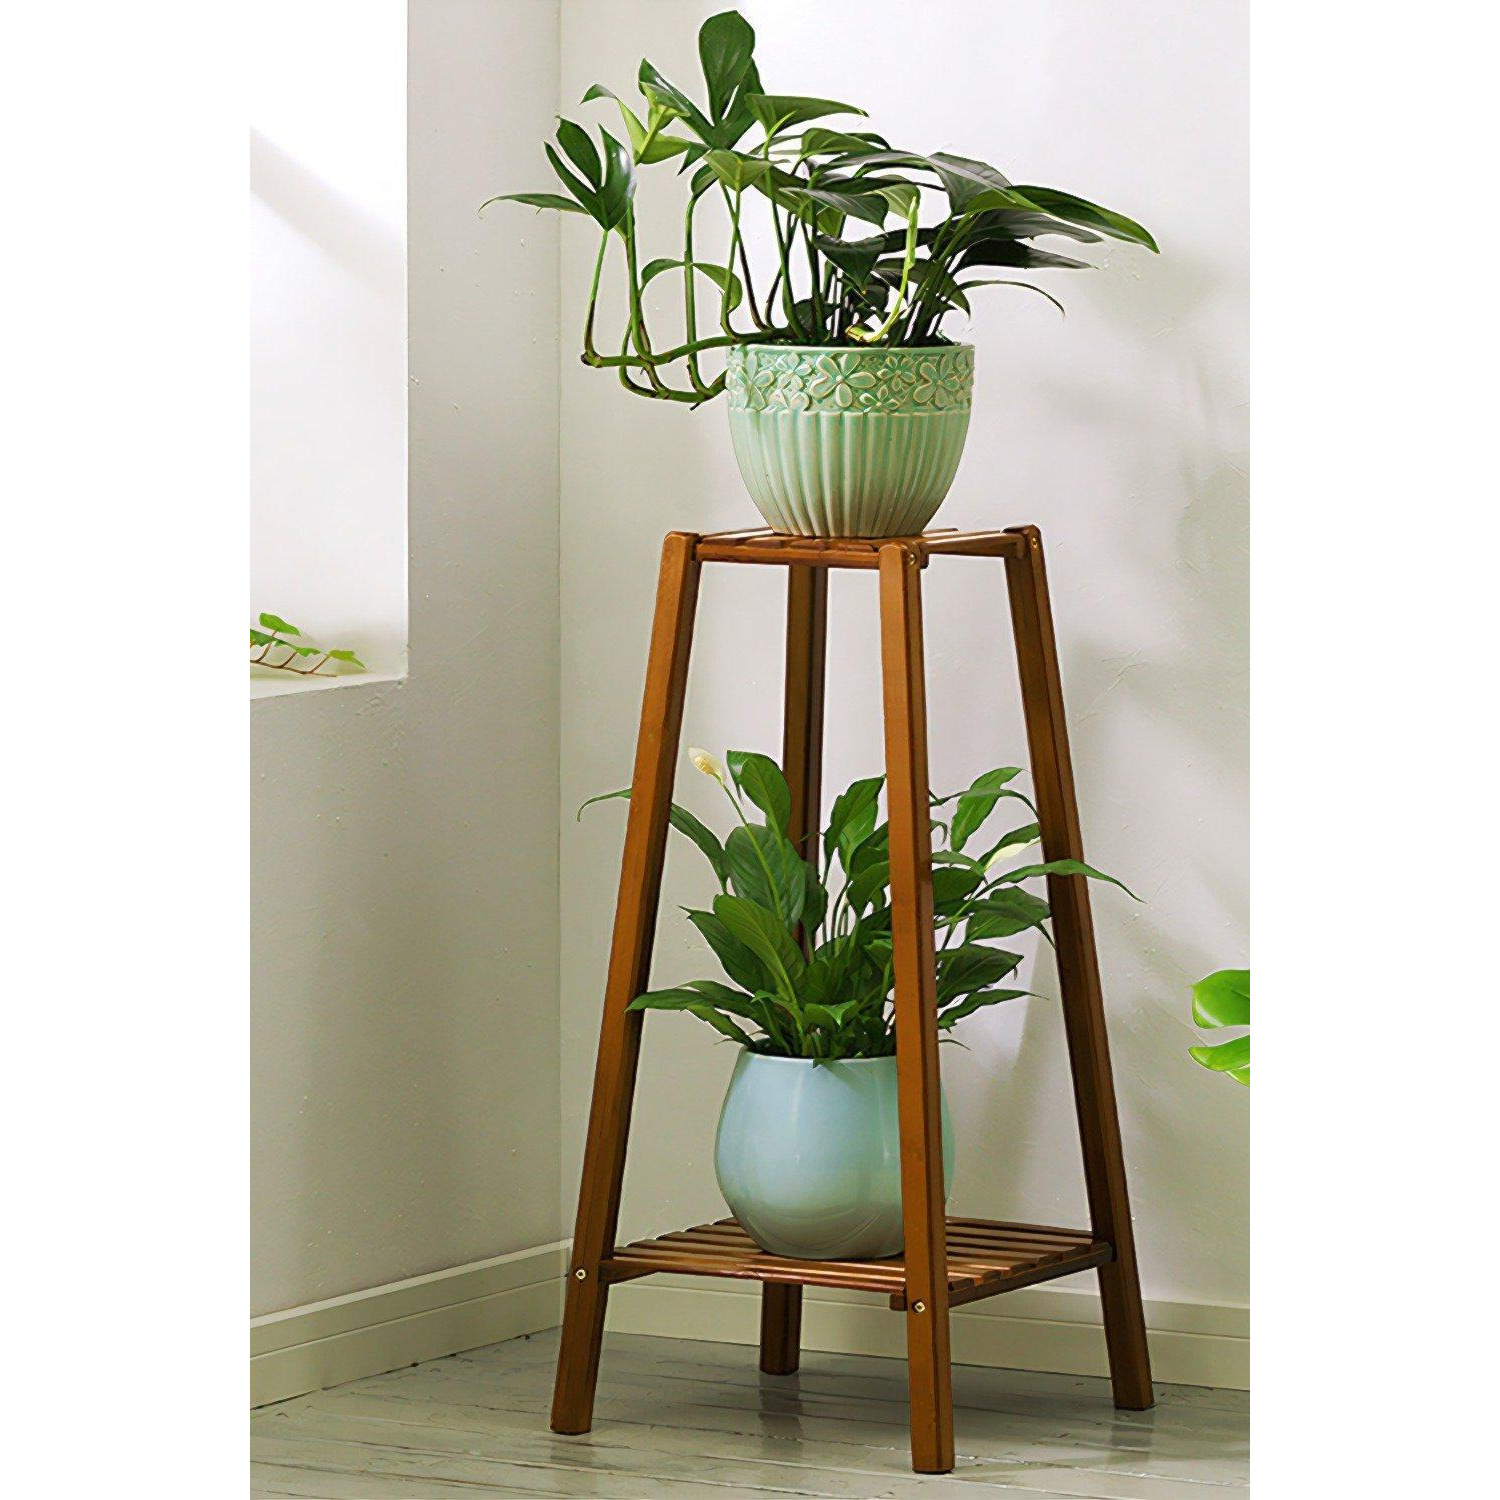 2 tier Degraff Free Form Multi Tiered Plant Stand - image 1